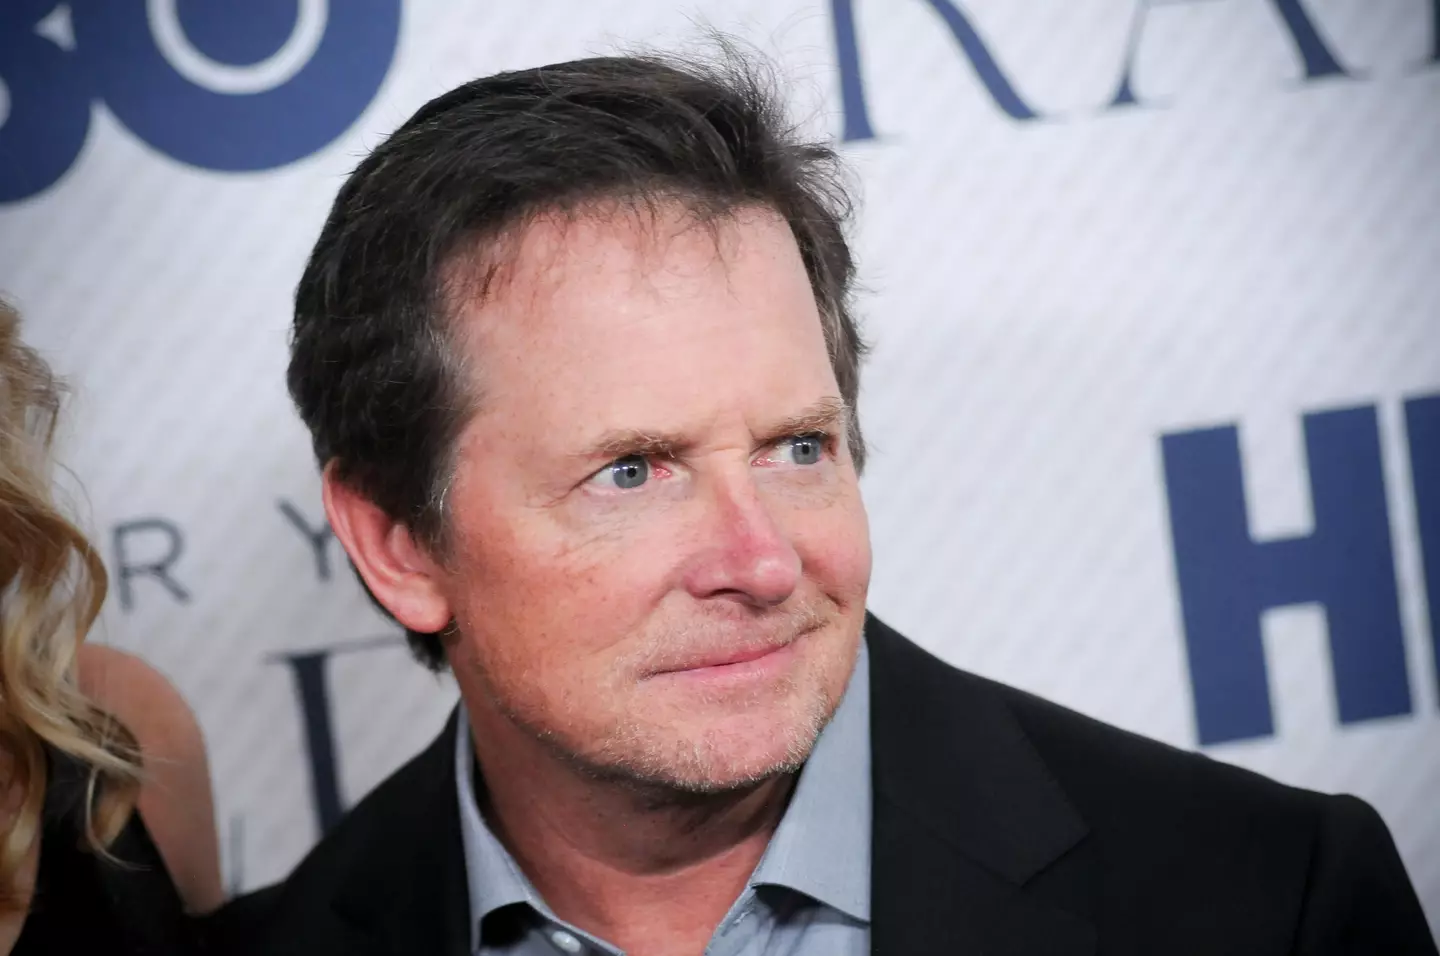 Michael J Fox isn't really called Michael J Fox, though 'Michael' and 'Fox' are parts of his real name.